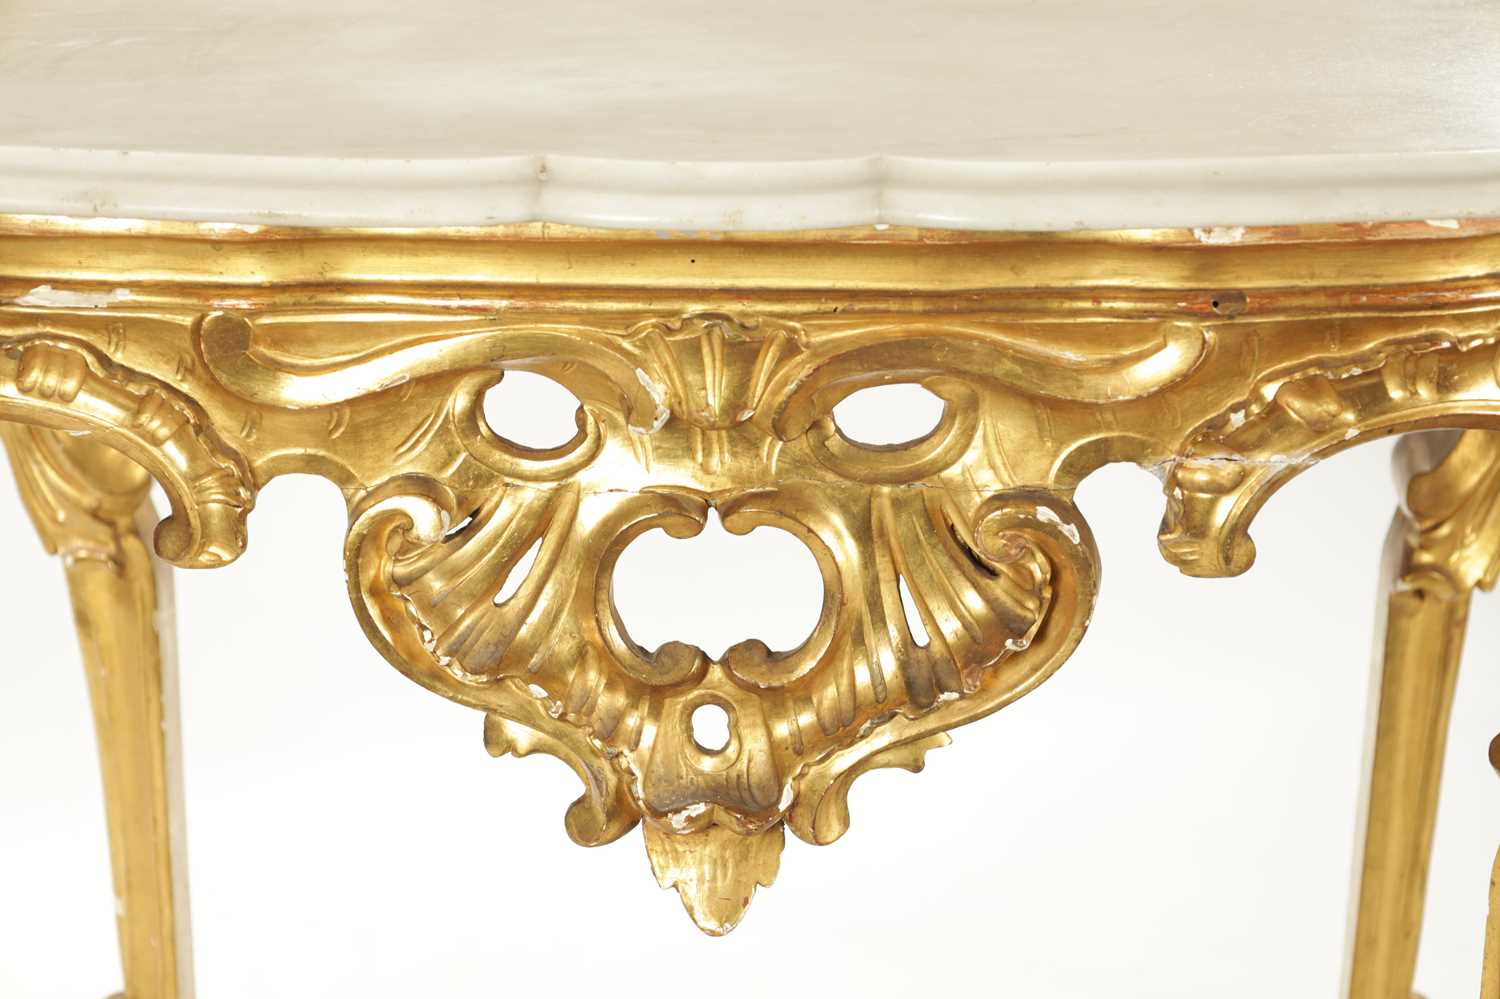 AN 18TH CENTURY CARVED GILTWOOD CONSOLE TABLE - Image 5 of 7